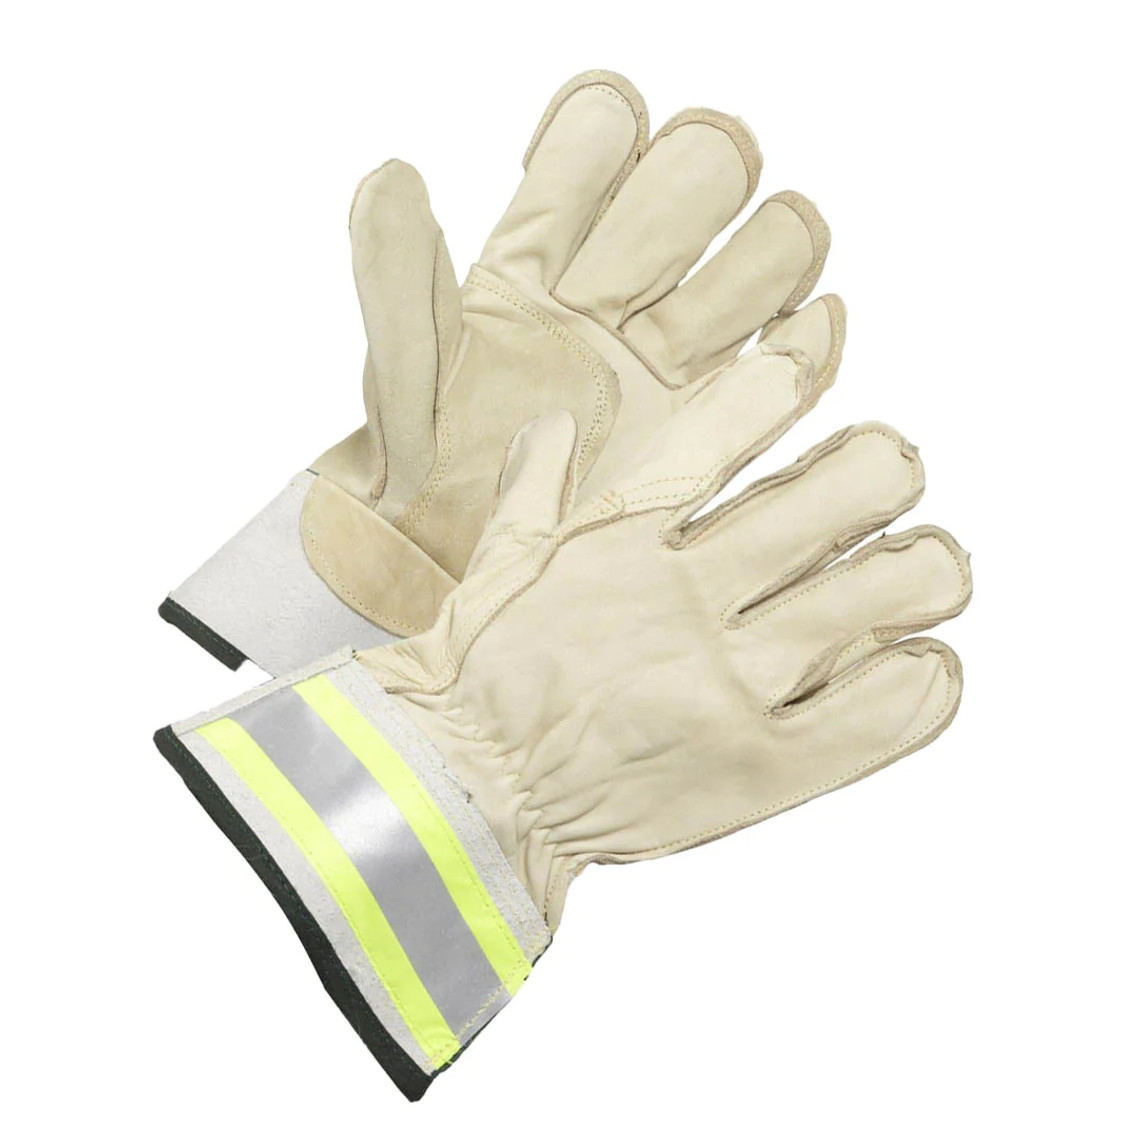 Forcefield Arborist's Glove with Reflective Cuff (12 Pairs/Box) | SafetyApparel.ca